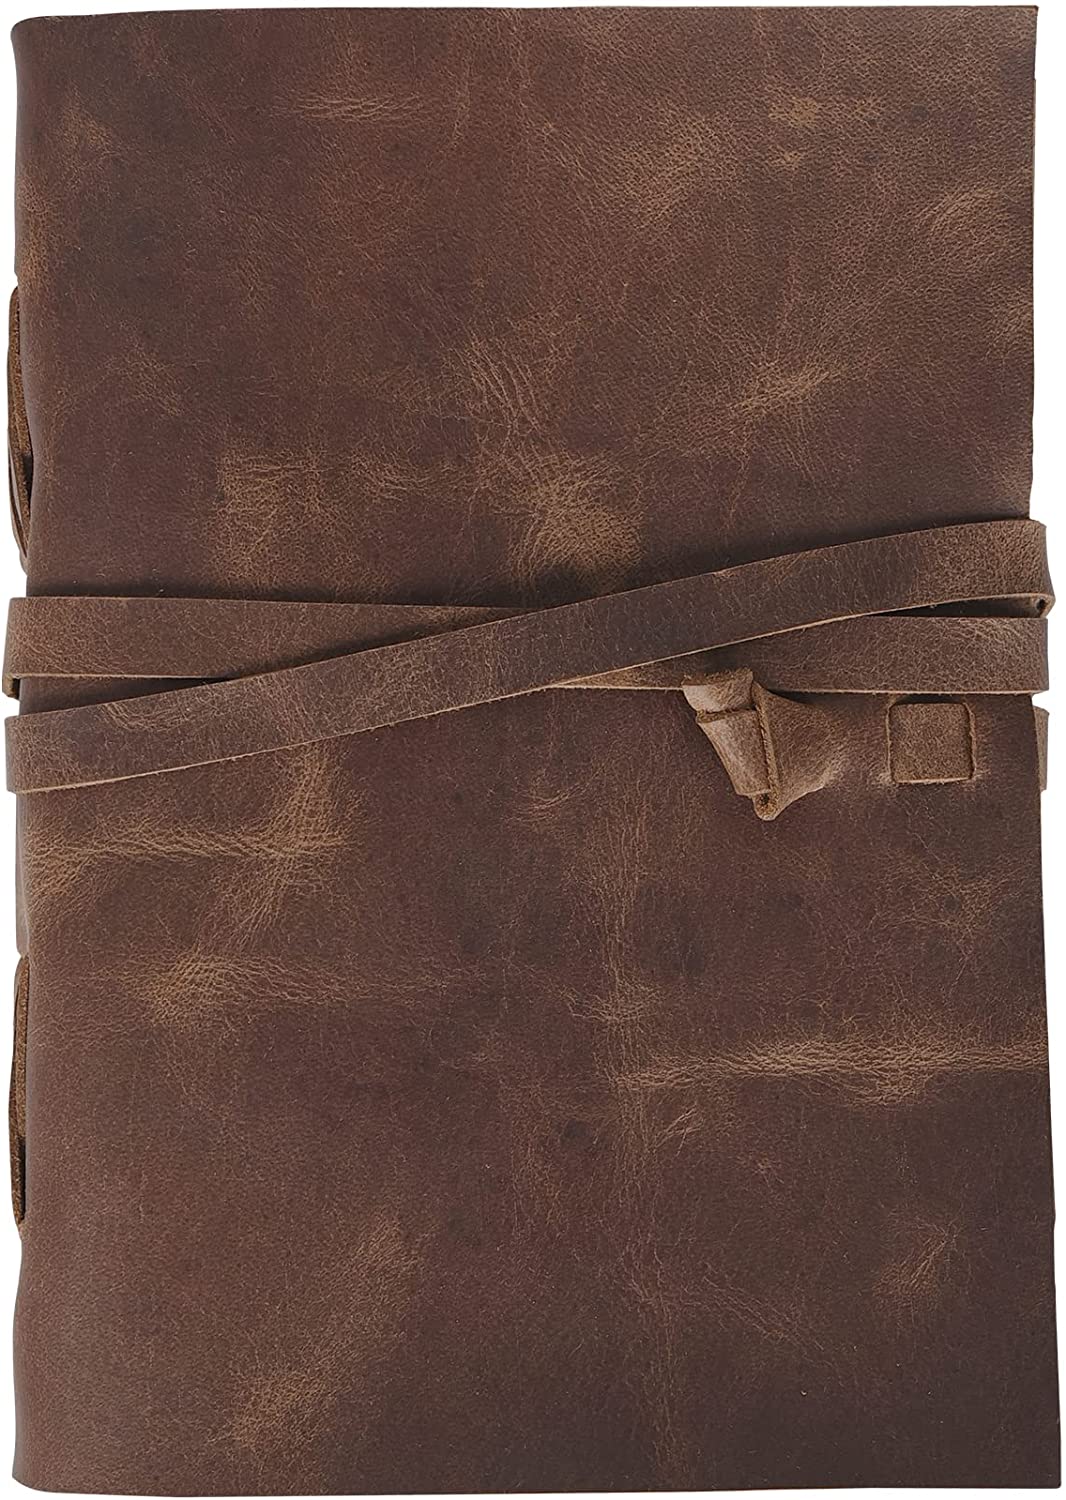 Classic Leather Journal with Unlined Pages - 9x12